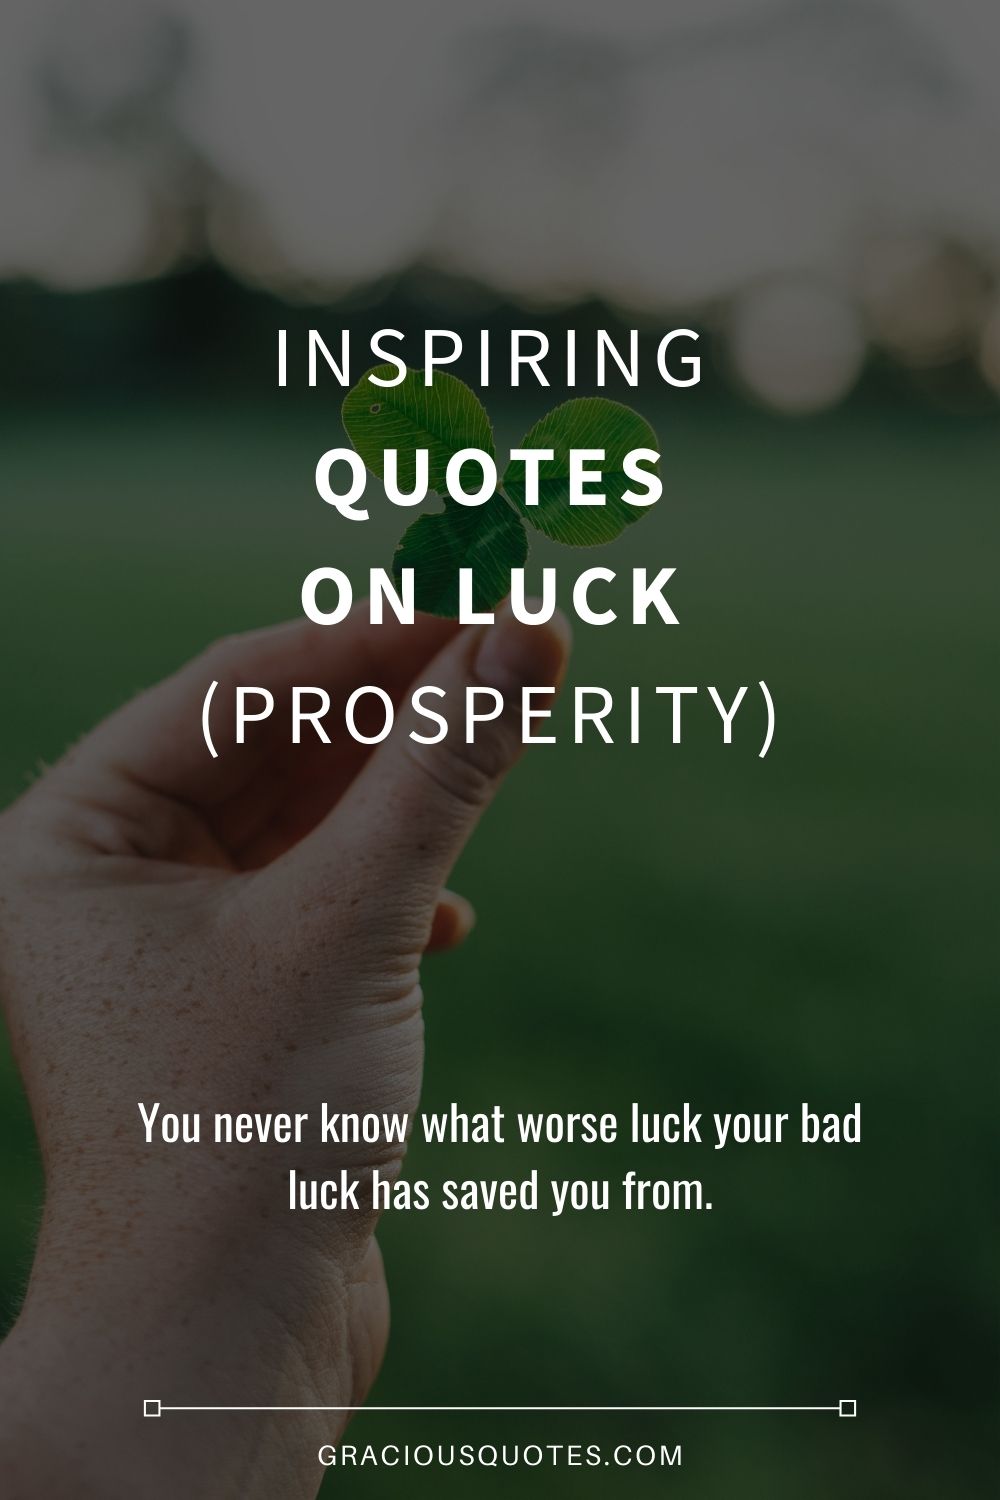 Inspiring Quotes on Luck (PROSPERITY) - Gracious Quotes